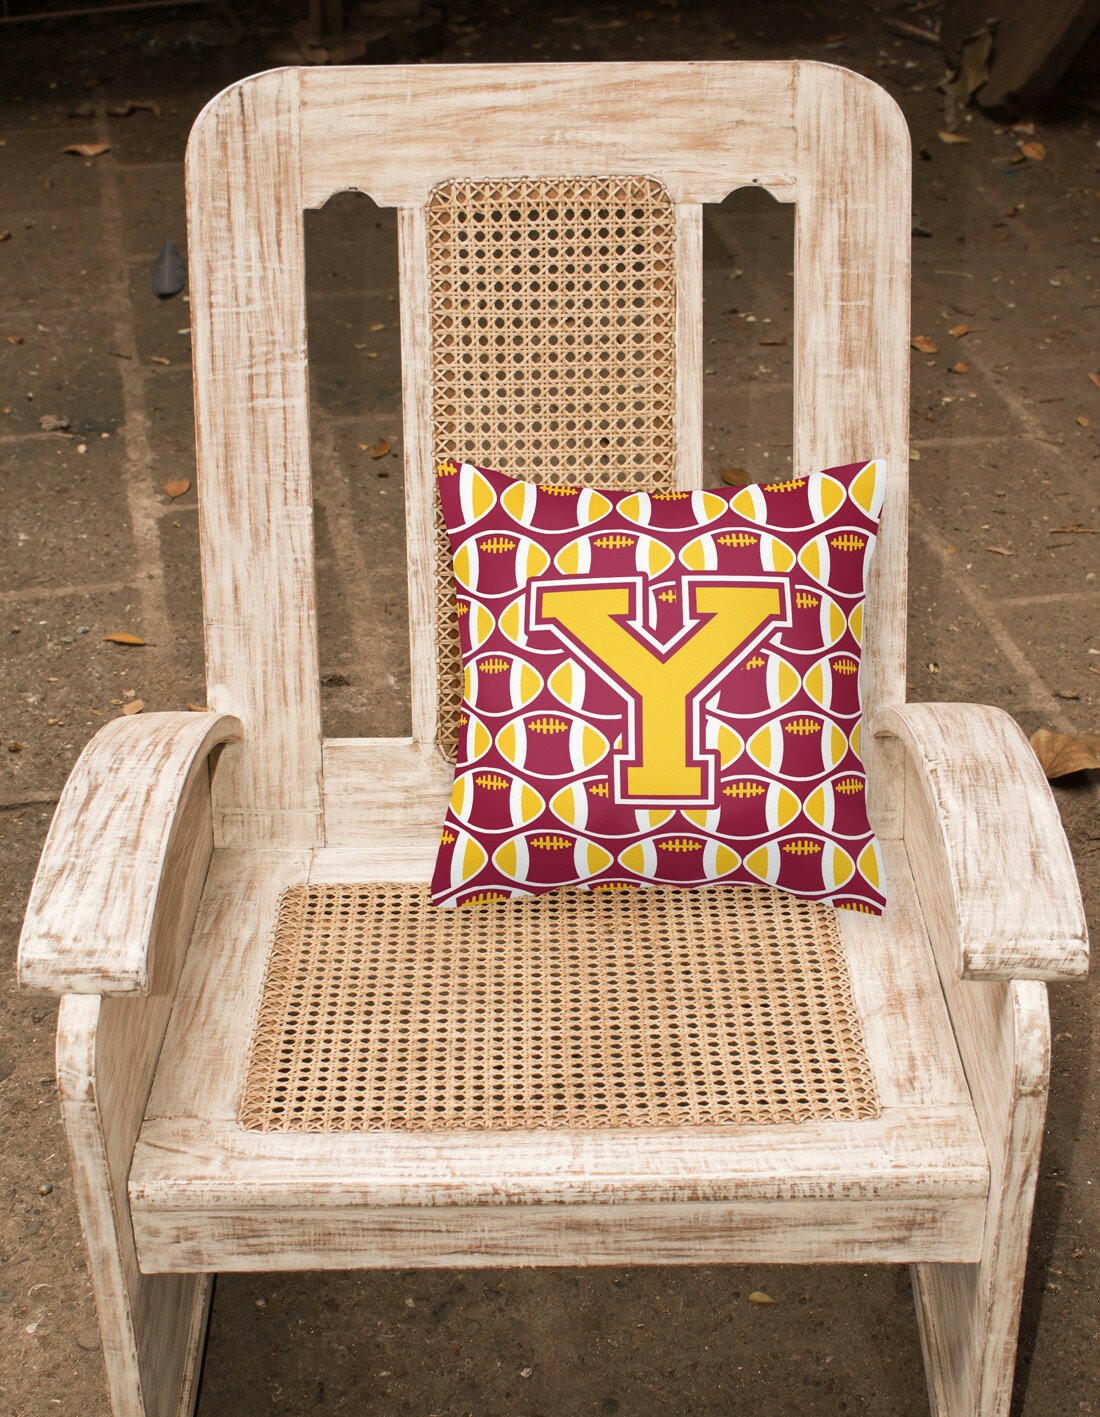 Letter Y Football Maroon and Gold Fabric Decorative Pillow CJ1081-YPW1414 by Caroline's Treasures